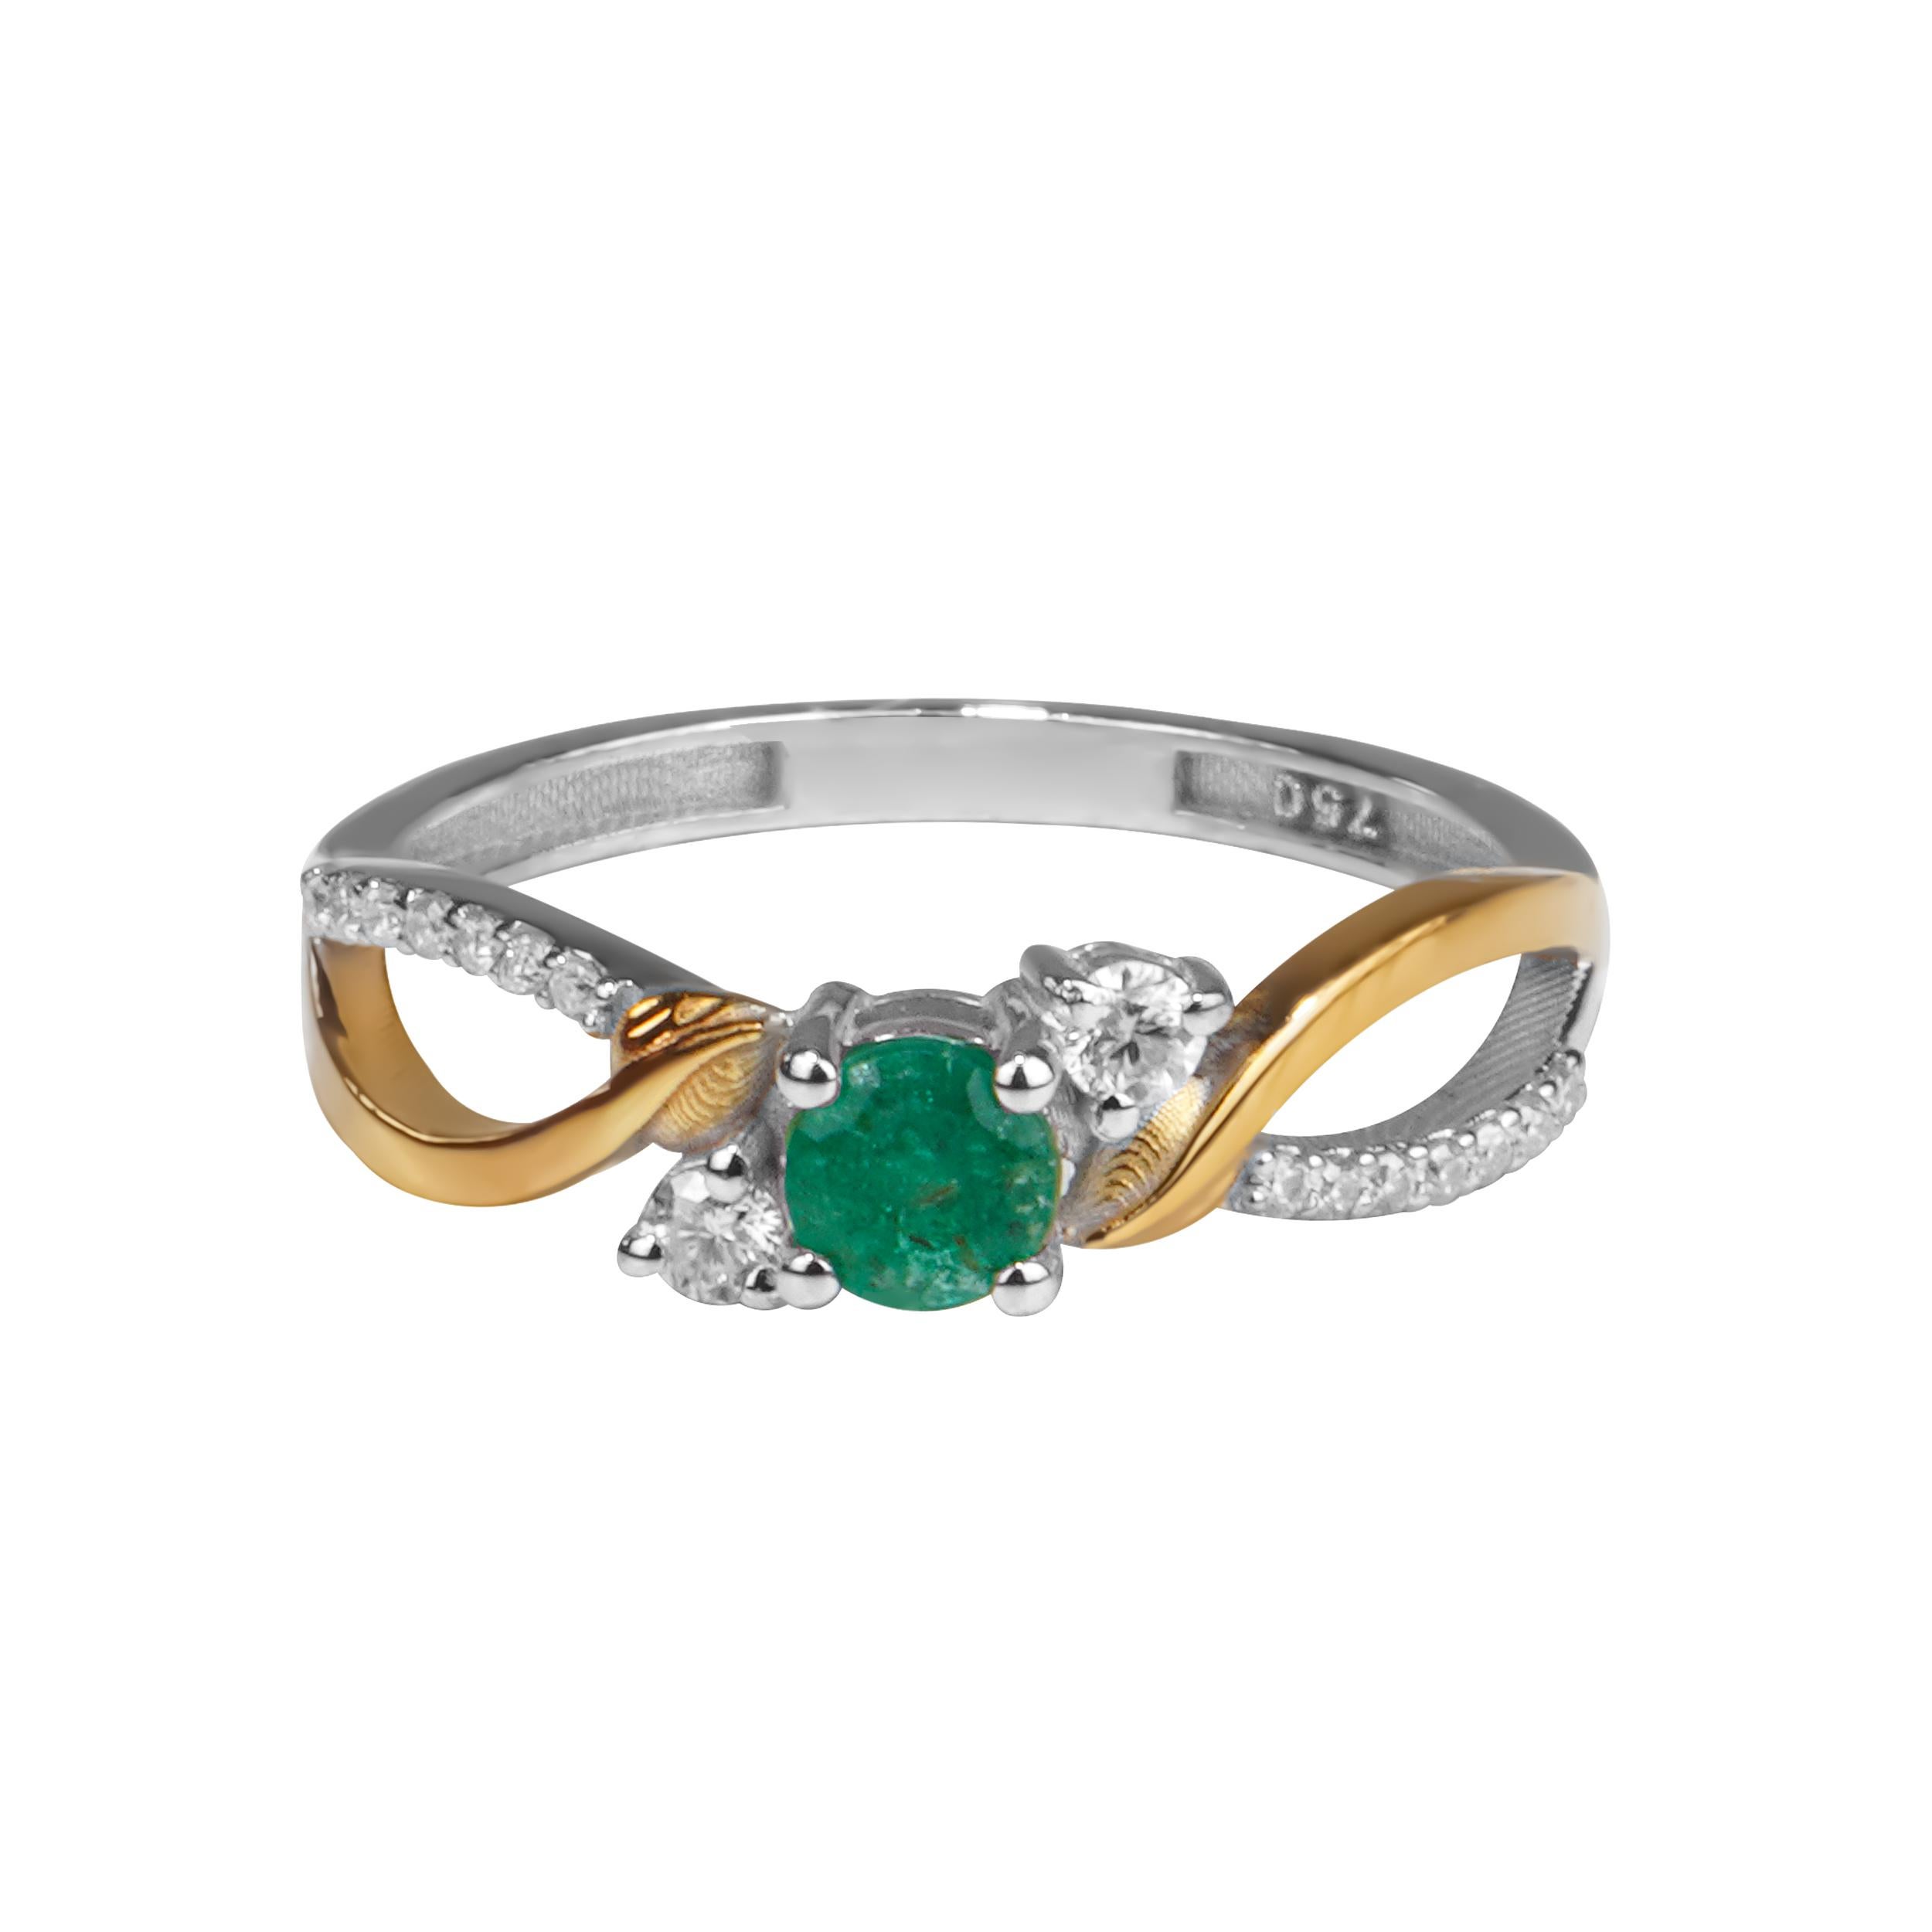 The lover’s universe emerald ring is a stunning and unique ring that will make your lover’s eyes sparkle. This ring features a natural loose emerald as the center stone, which has a vibrant green color and a rich history. Emeralds are known as the